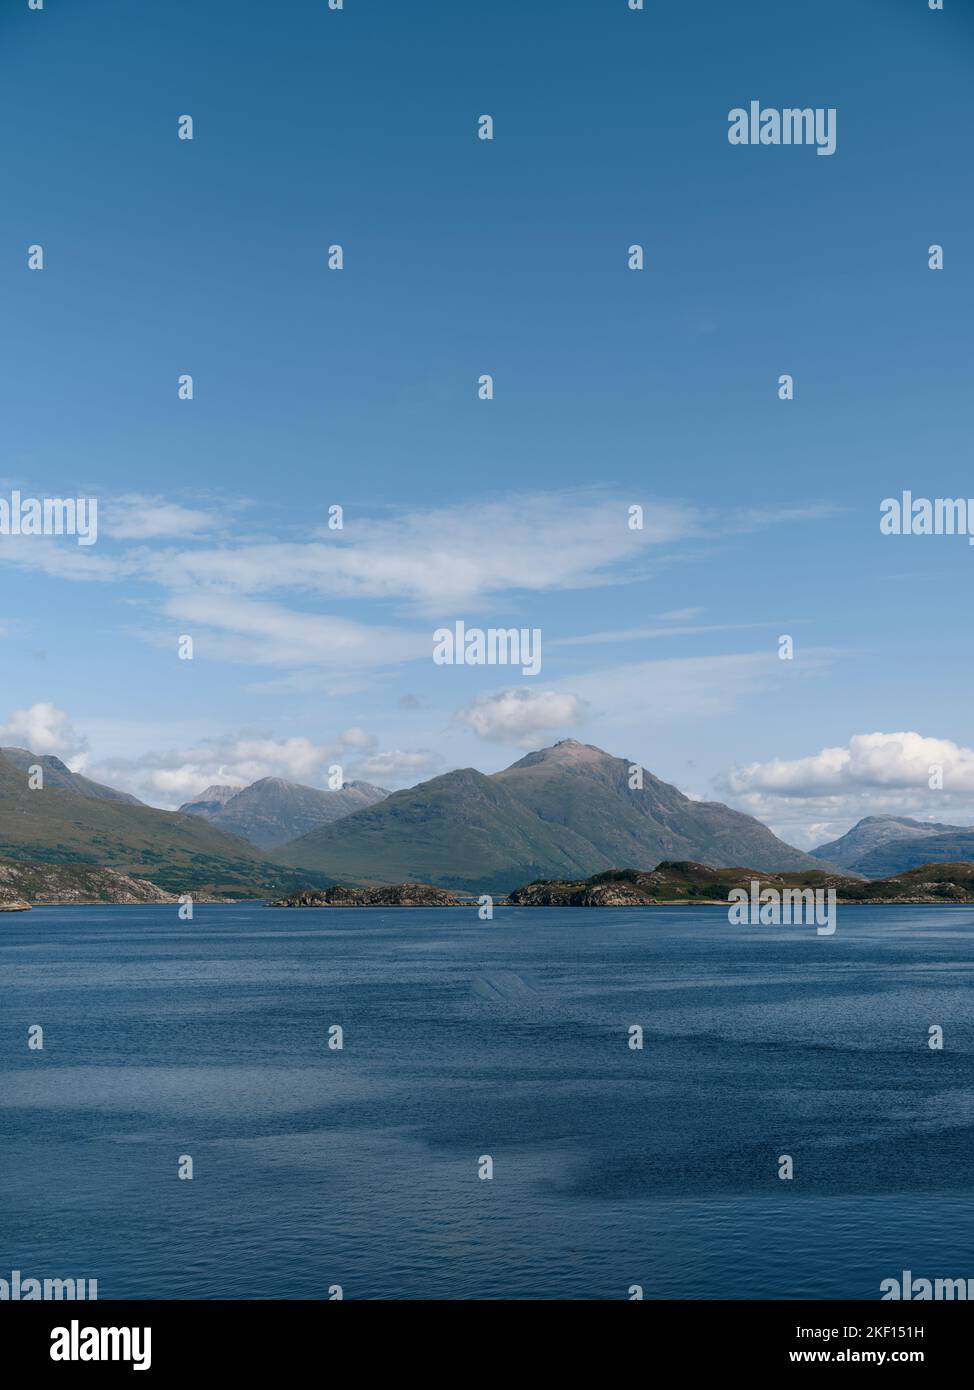 Loch Shieldaig and the Torridon mountains summer landscape in Wester Ross, Scotland UK Stock Photo